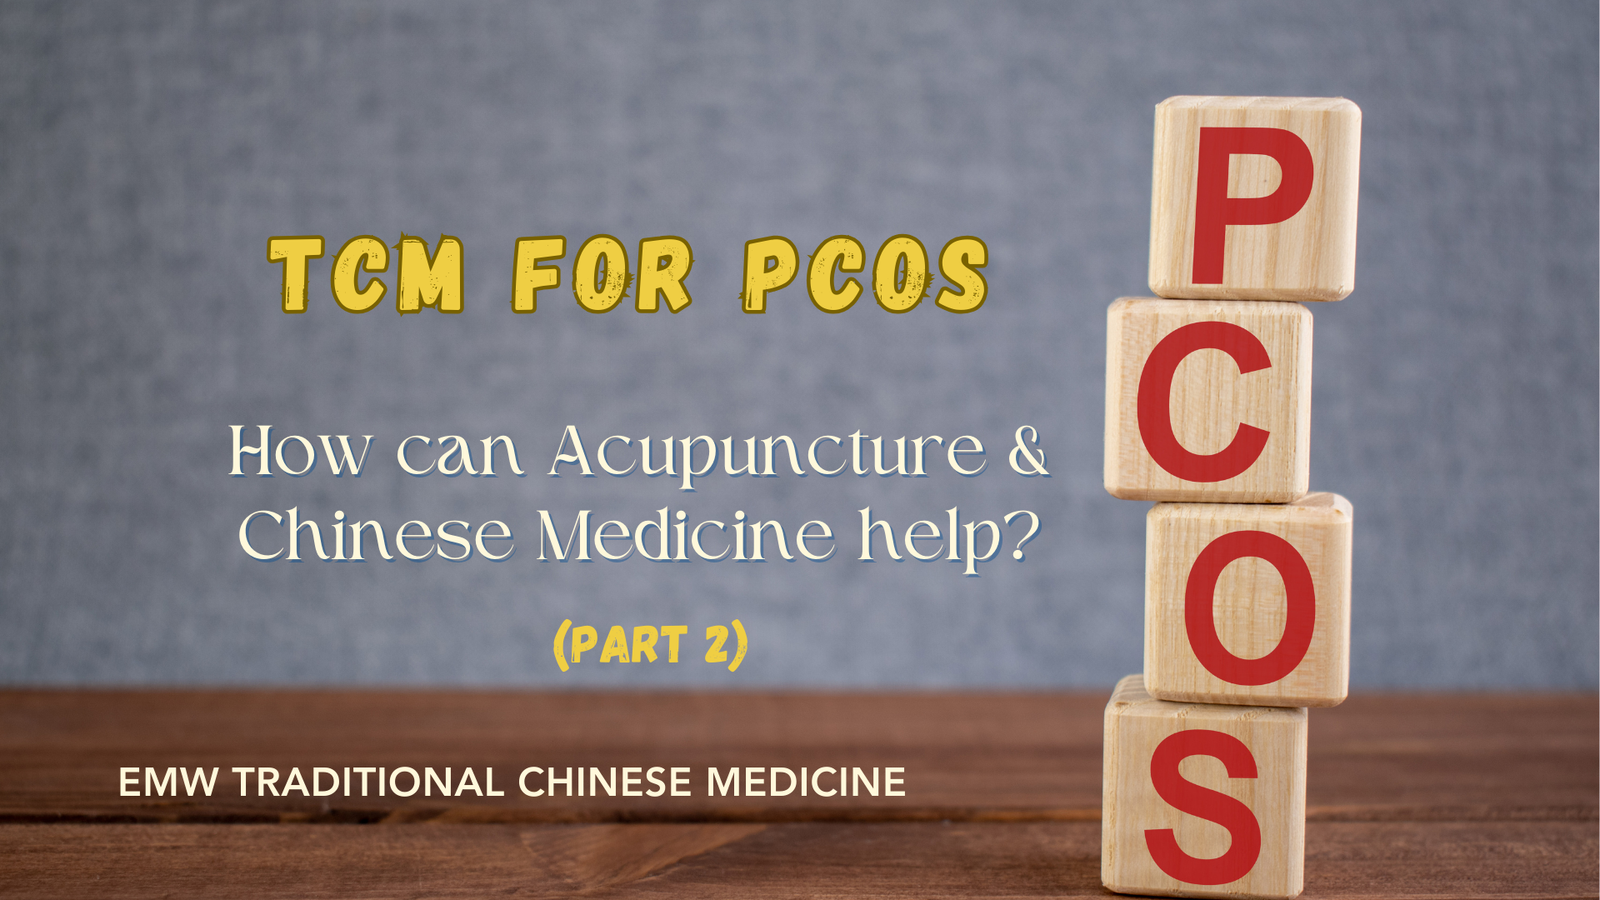 TCM for PCOS (part II): How can TCM acupuncture help?